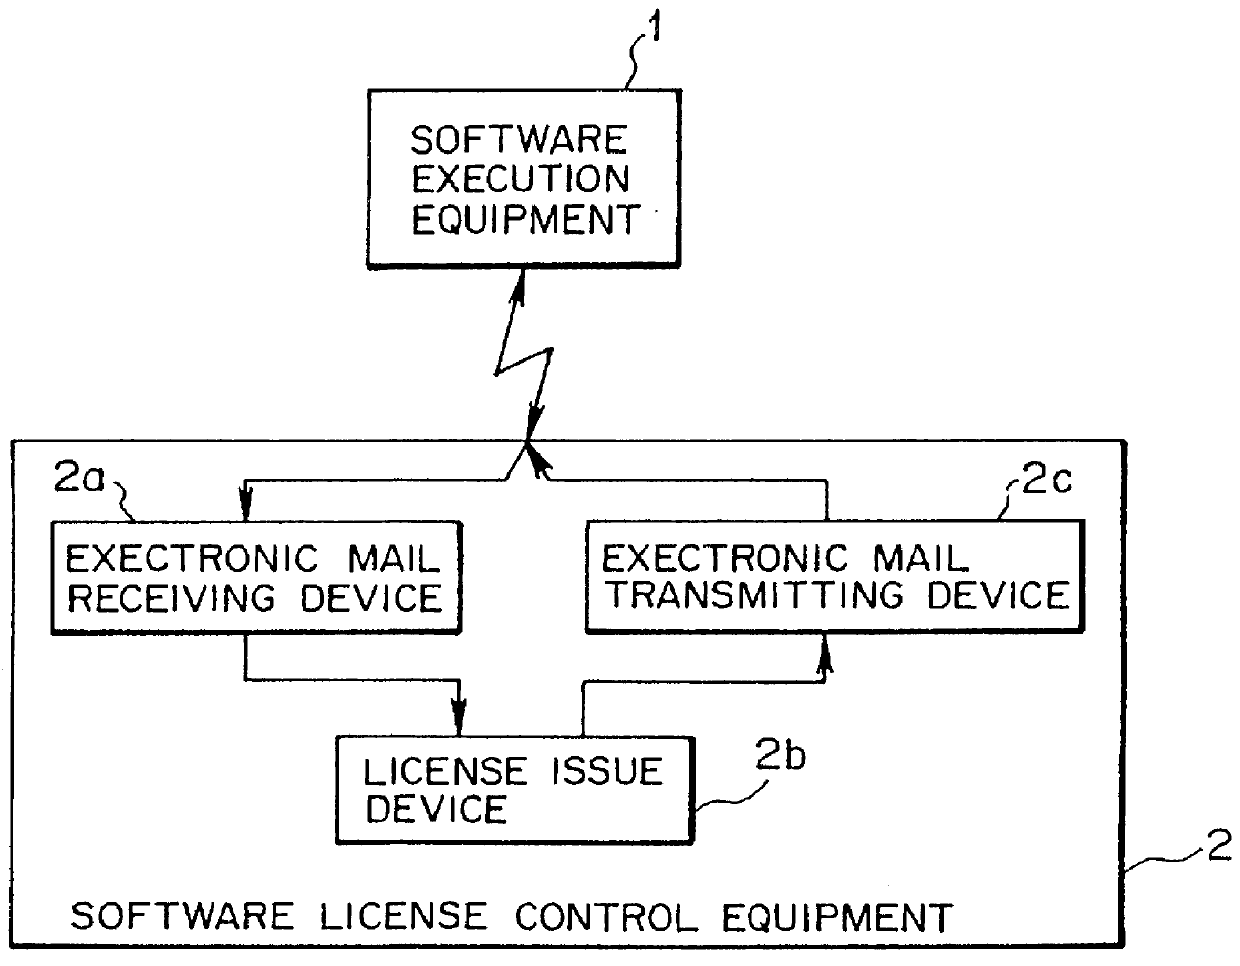 Software license control system and software license control equipment